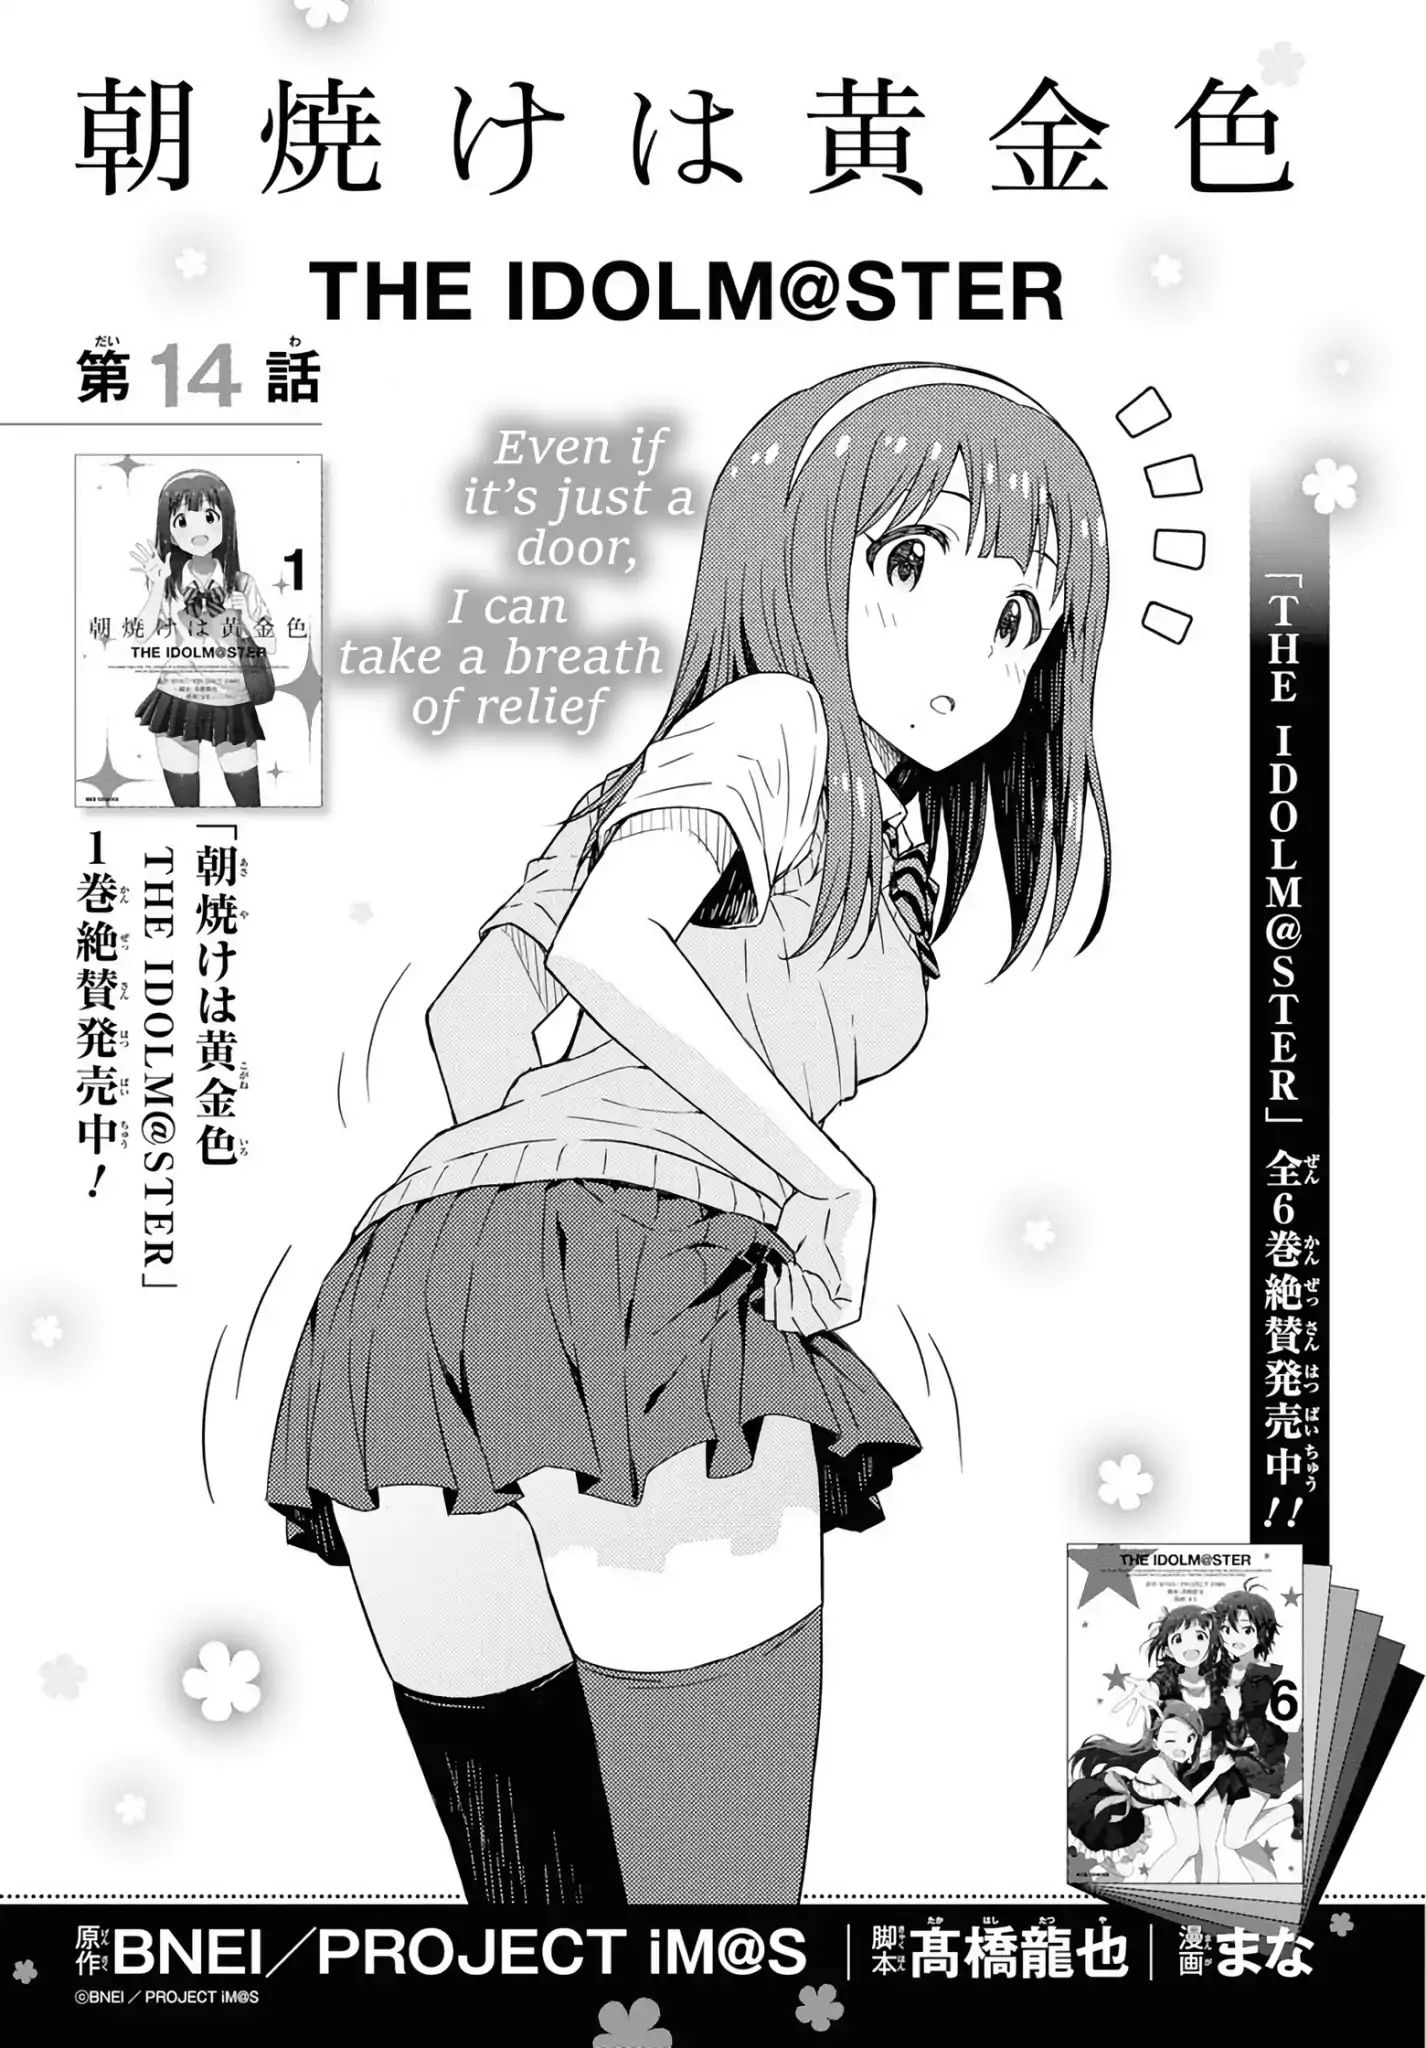 The Idolm@ster: Asayake Wa Koganeiro Vol.1 Chapter 14: Even If It’S Just A Door, I Can Take A Breath Of Relief - Picture 2